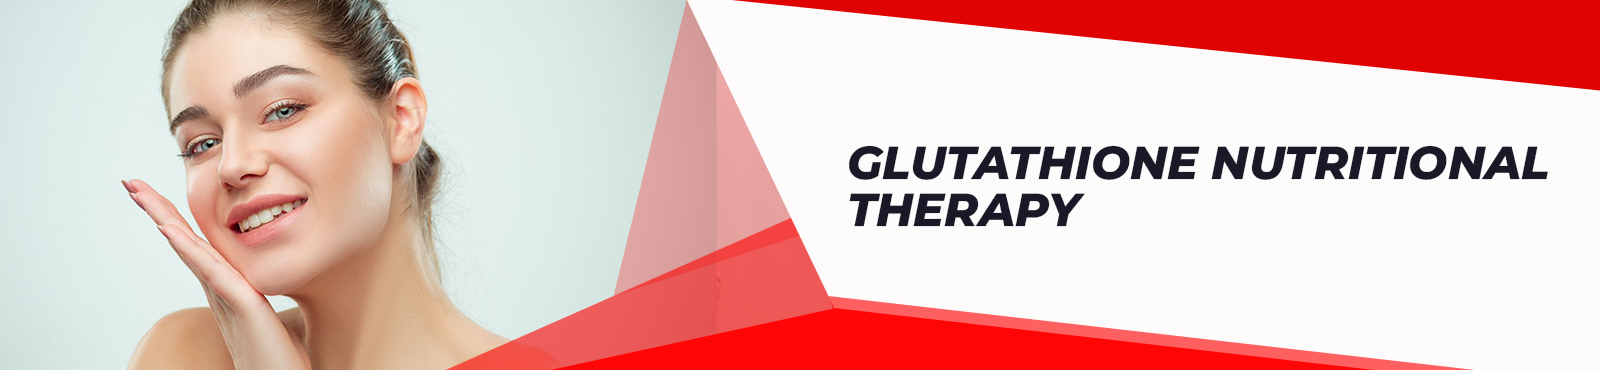 Glutathione Nutritional Therapy